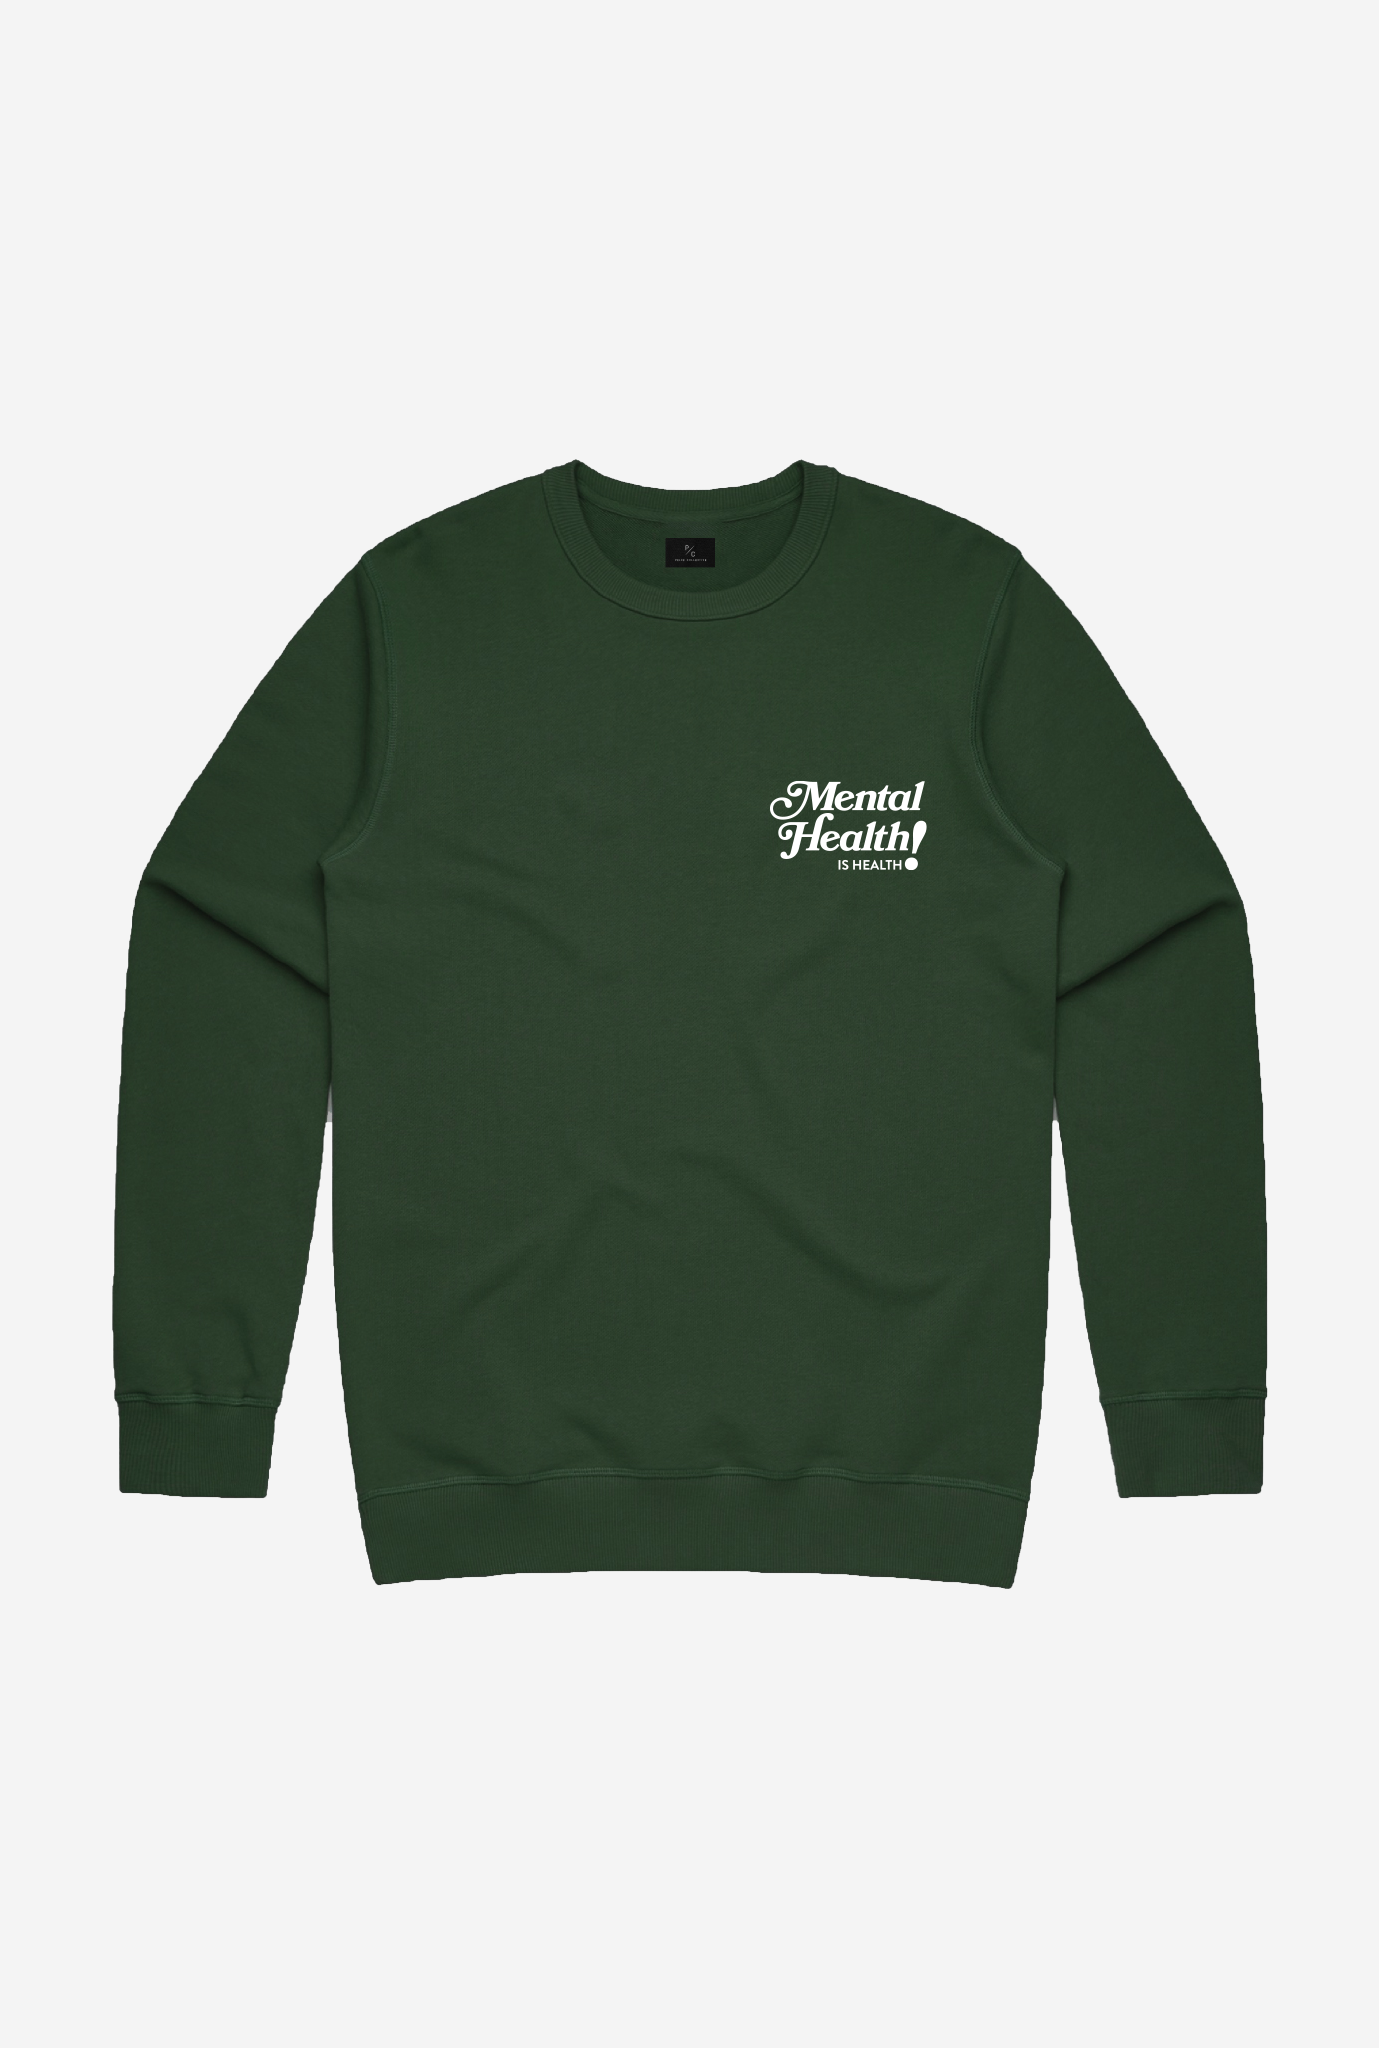 Mental Health is Health! Crewneck - Forest Green